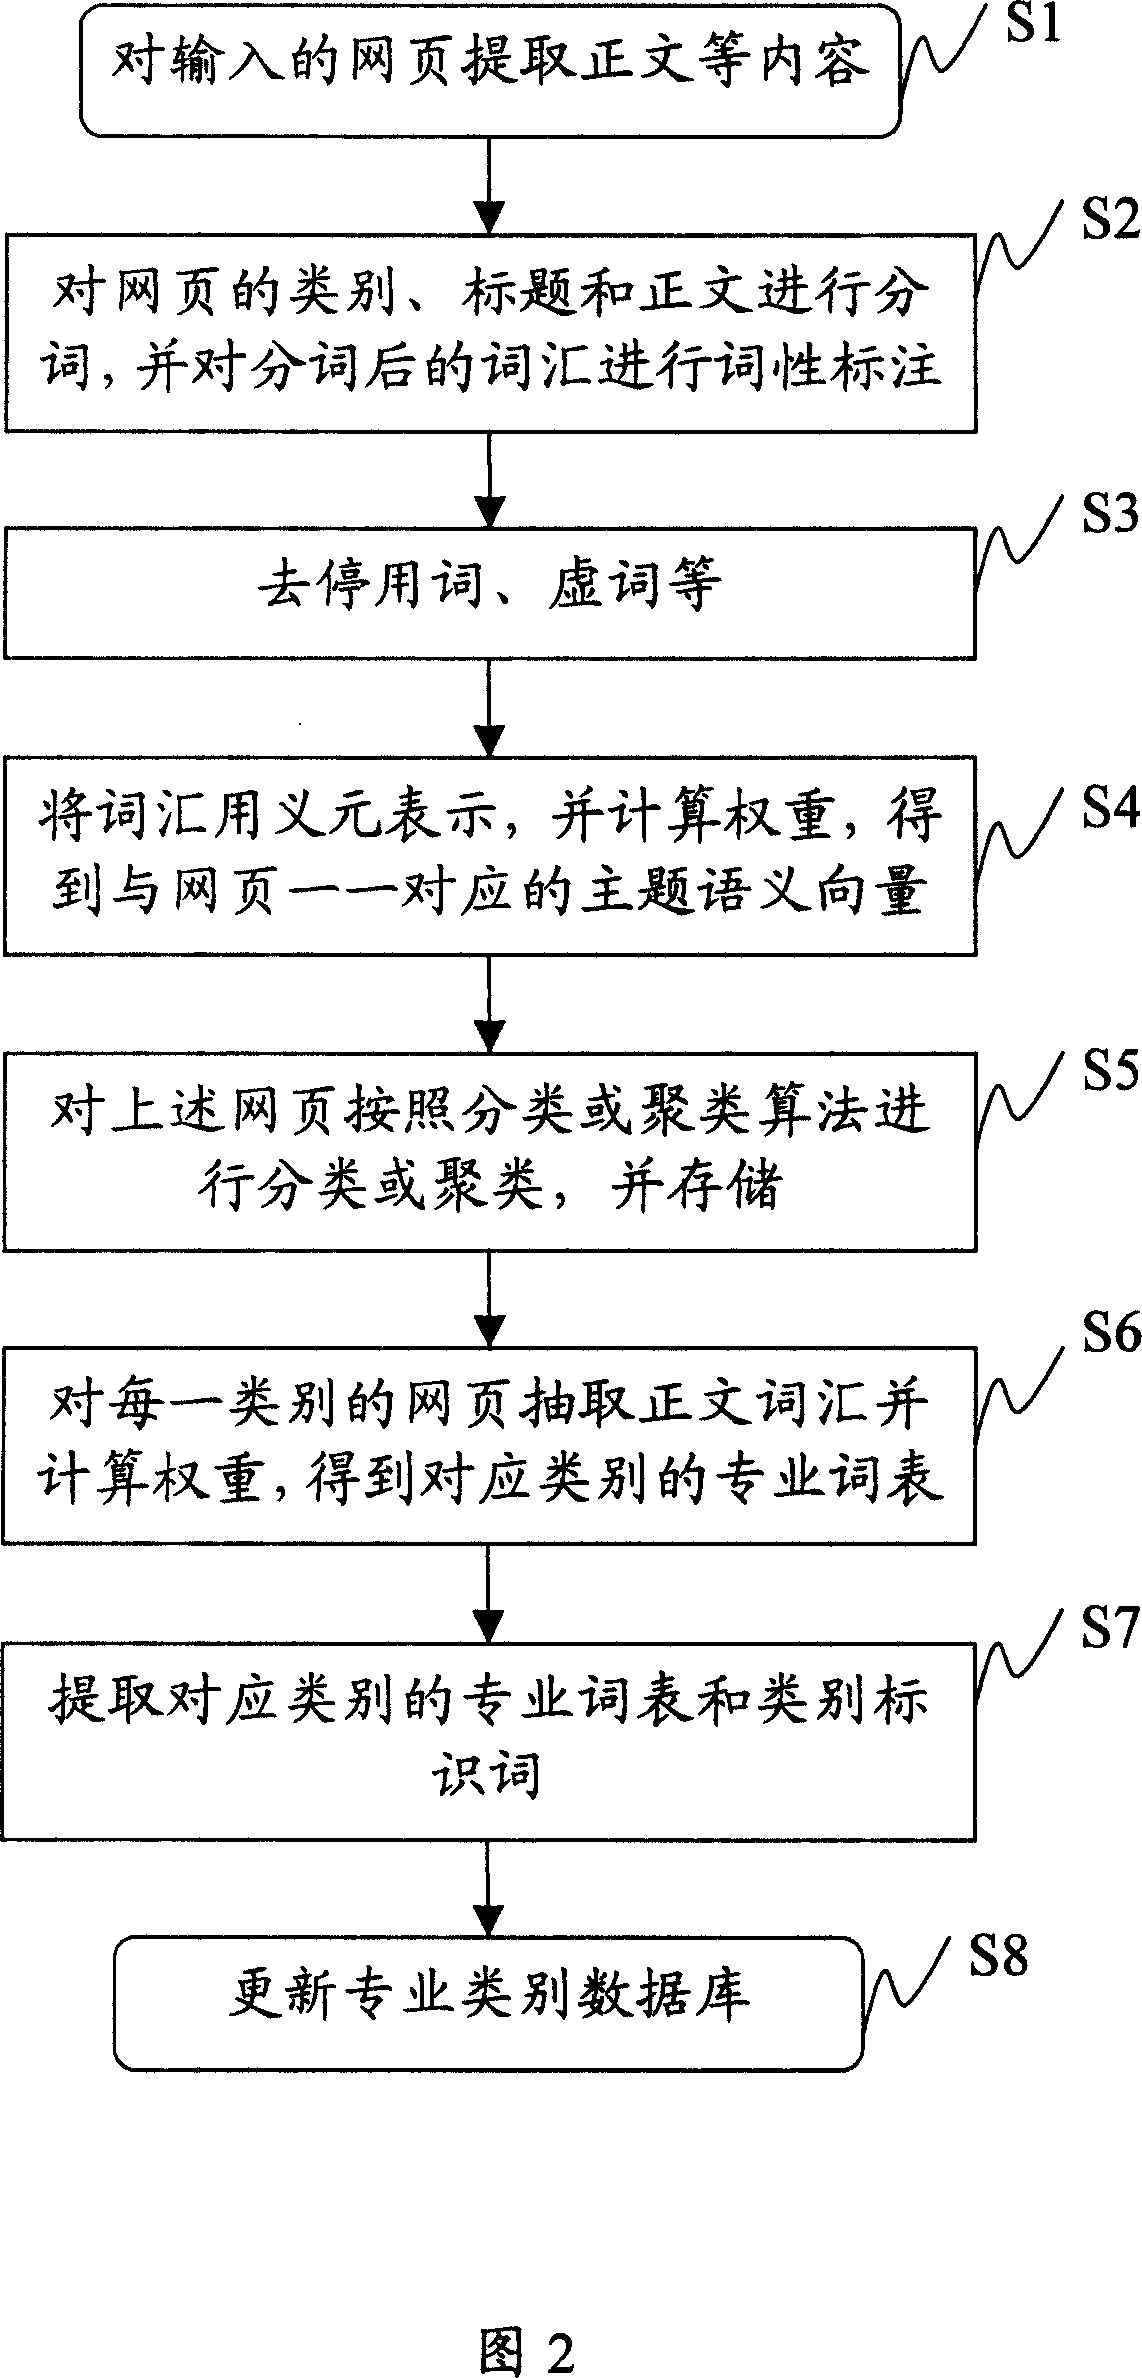 Special word list dynamic generation system and method